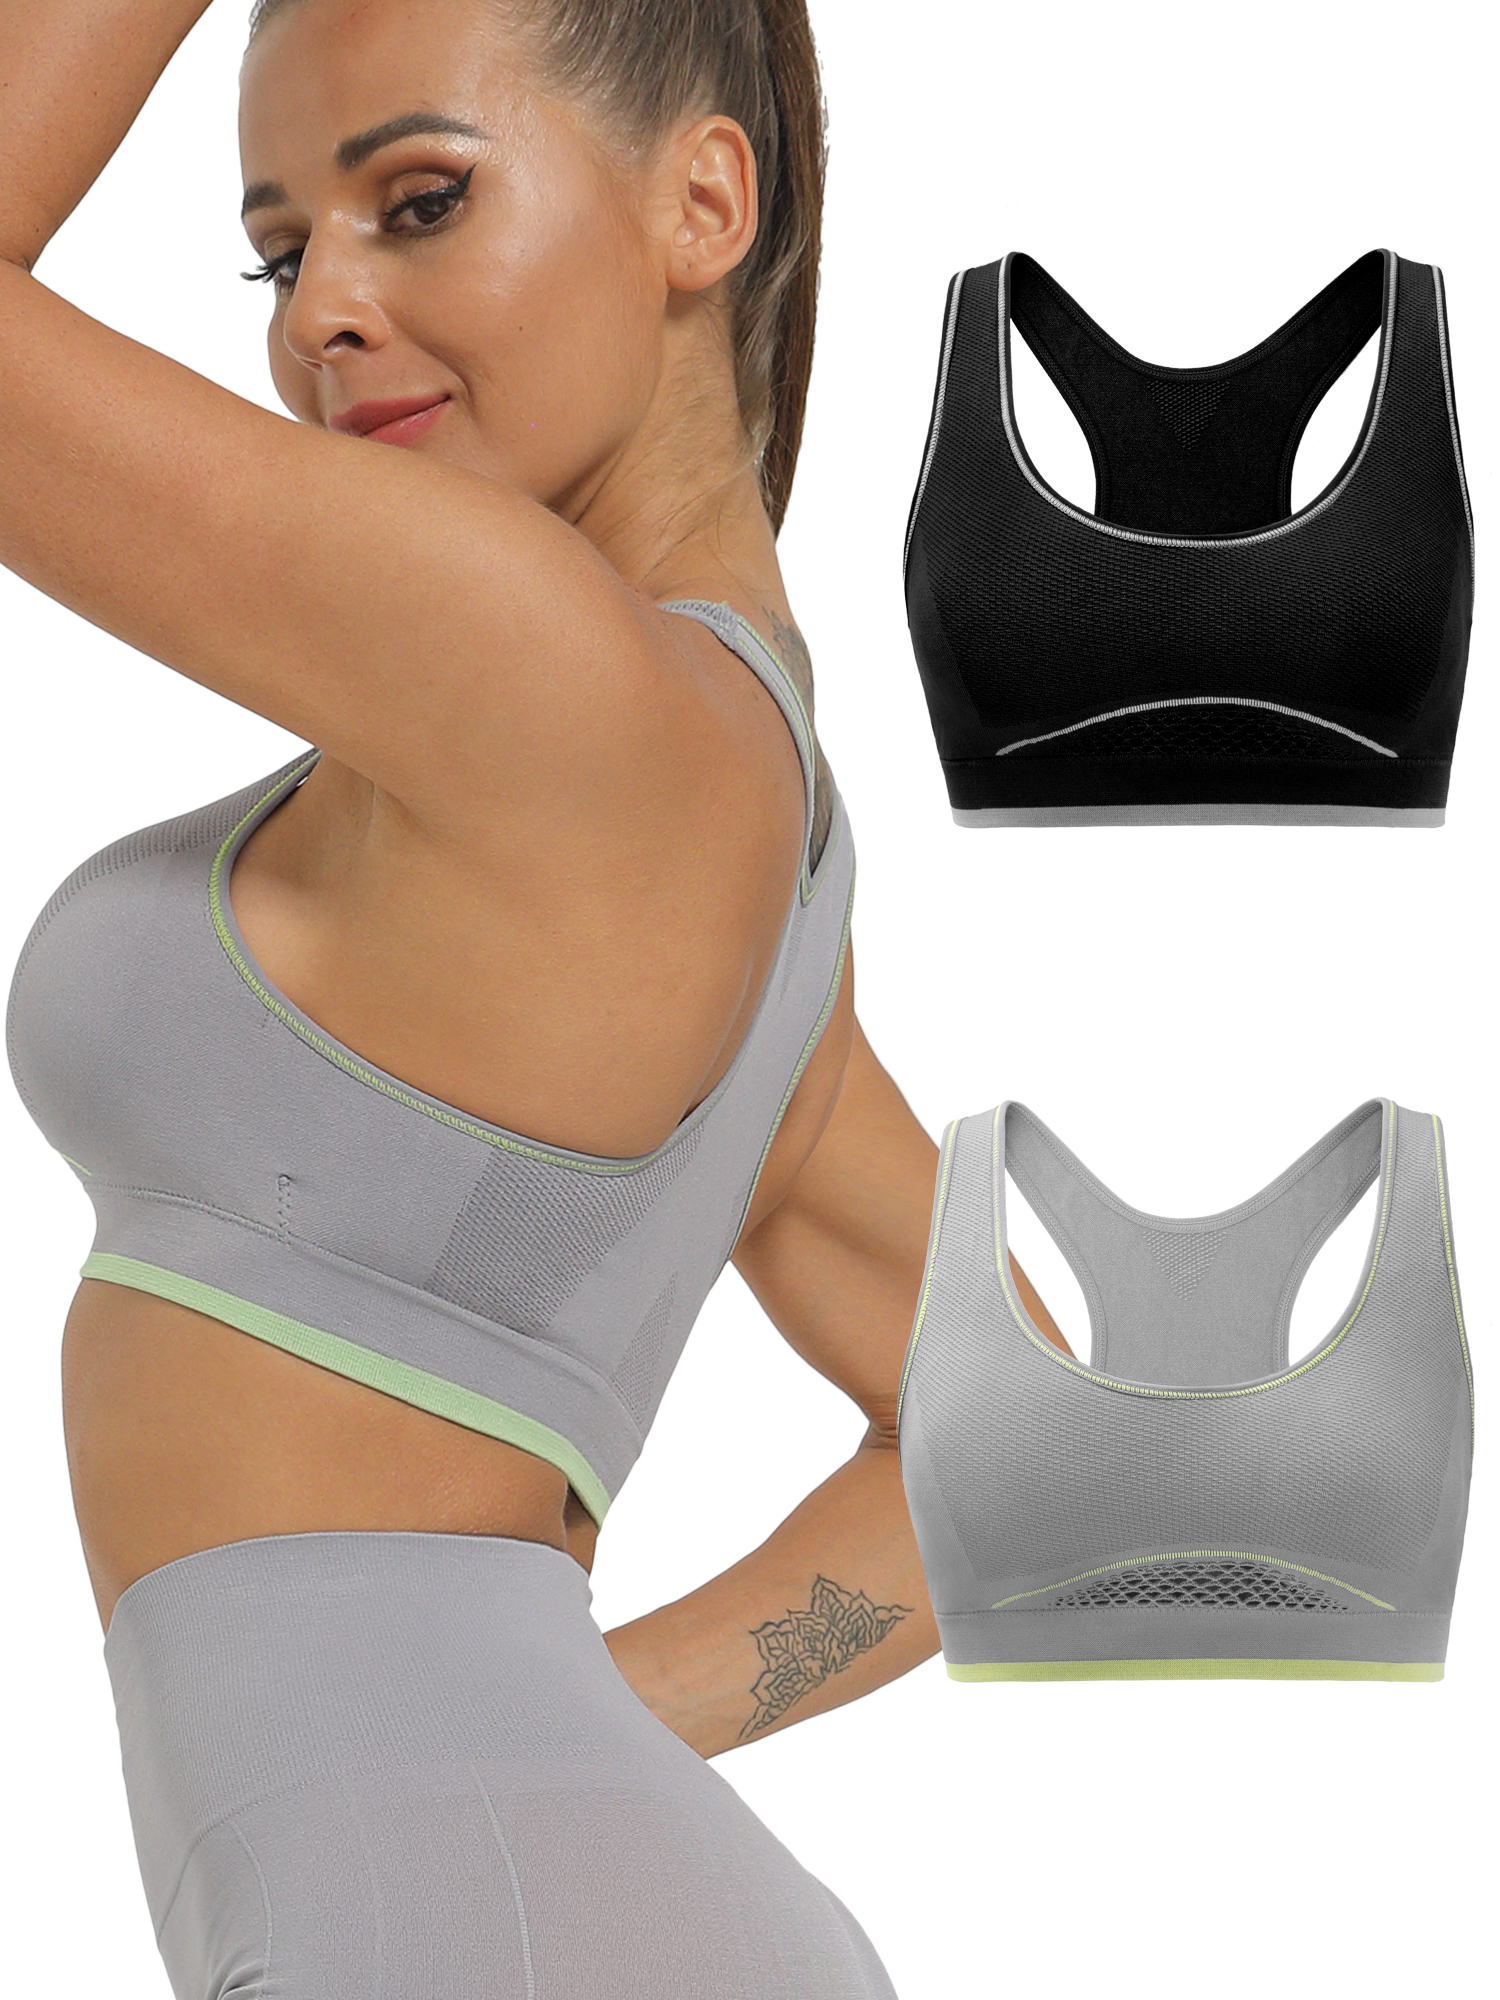 Women's Sports Bras High Impact Seamless Yoga Racerback with Removable Cups - image 1 of 6